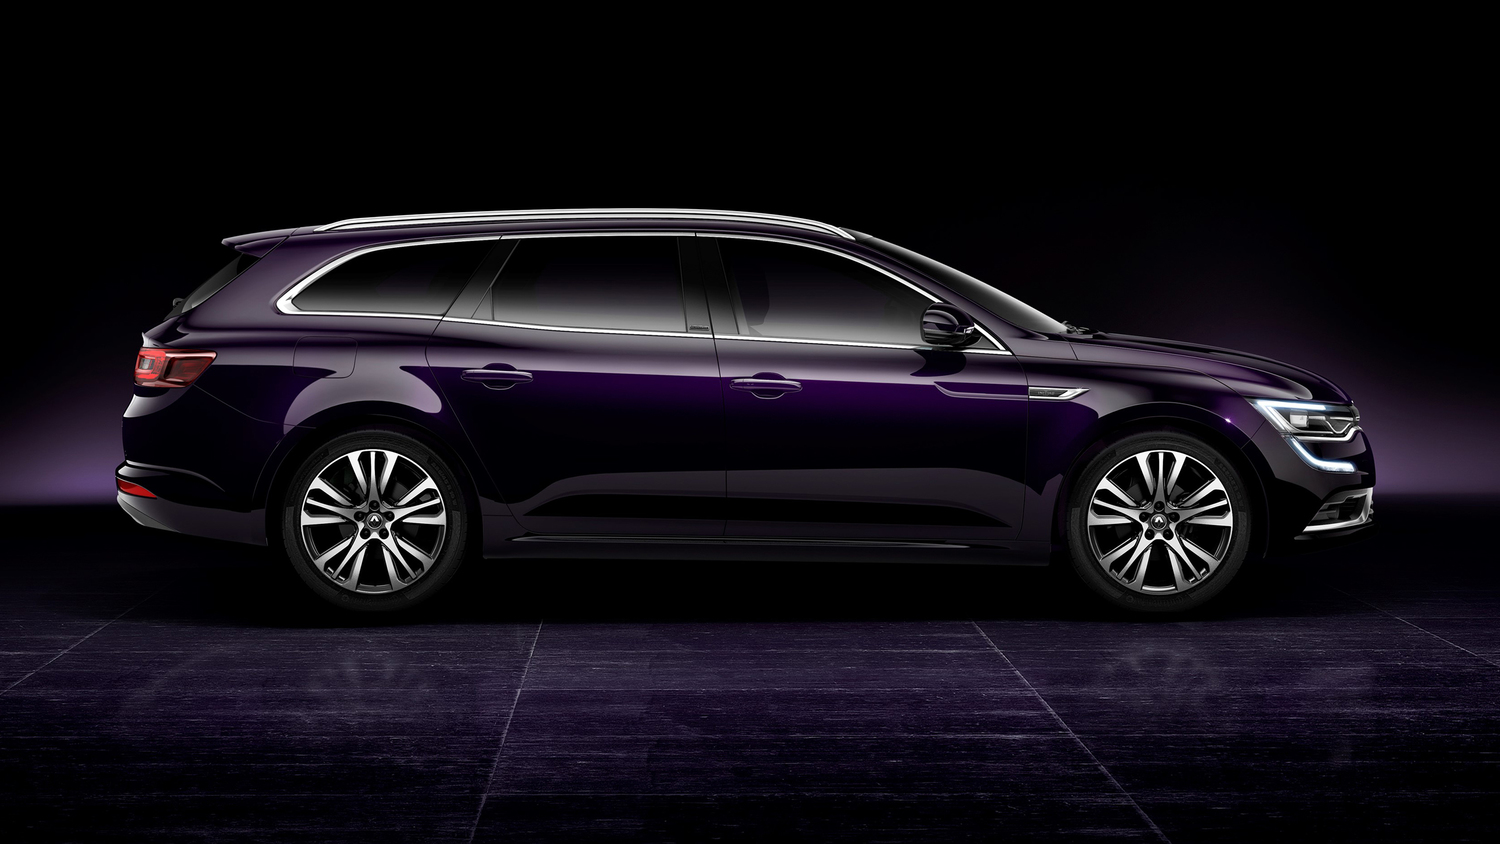 This is the Renault Talisman Estate. And we're not getting it in